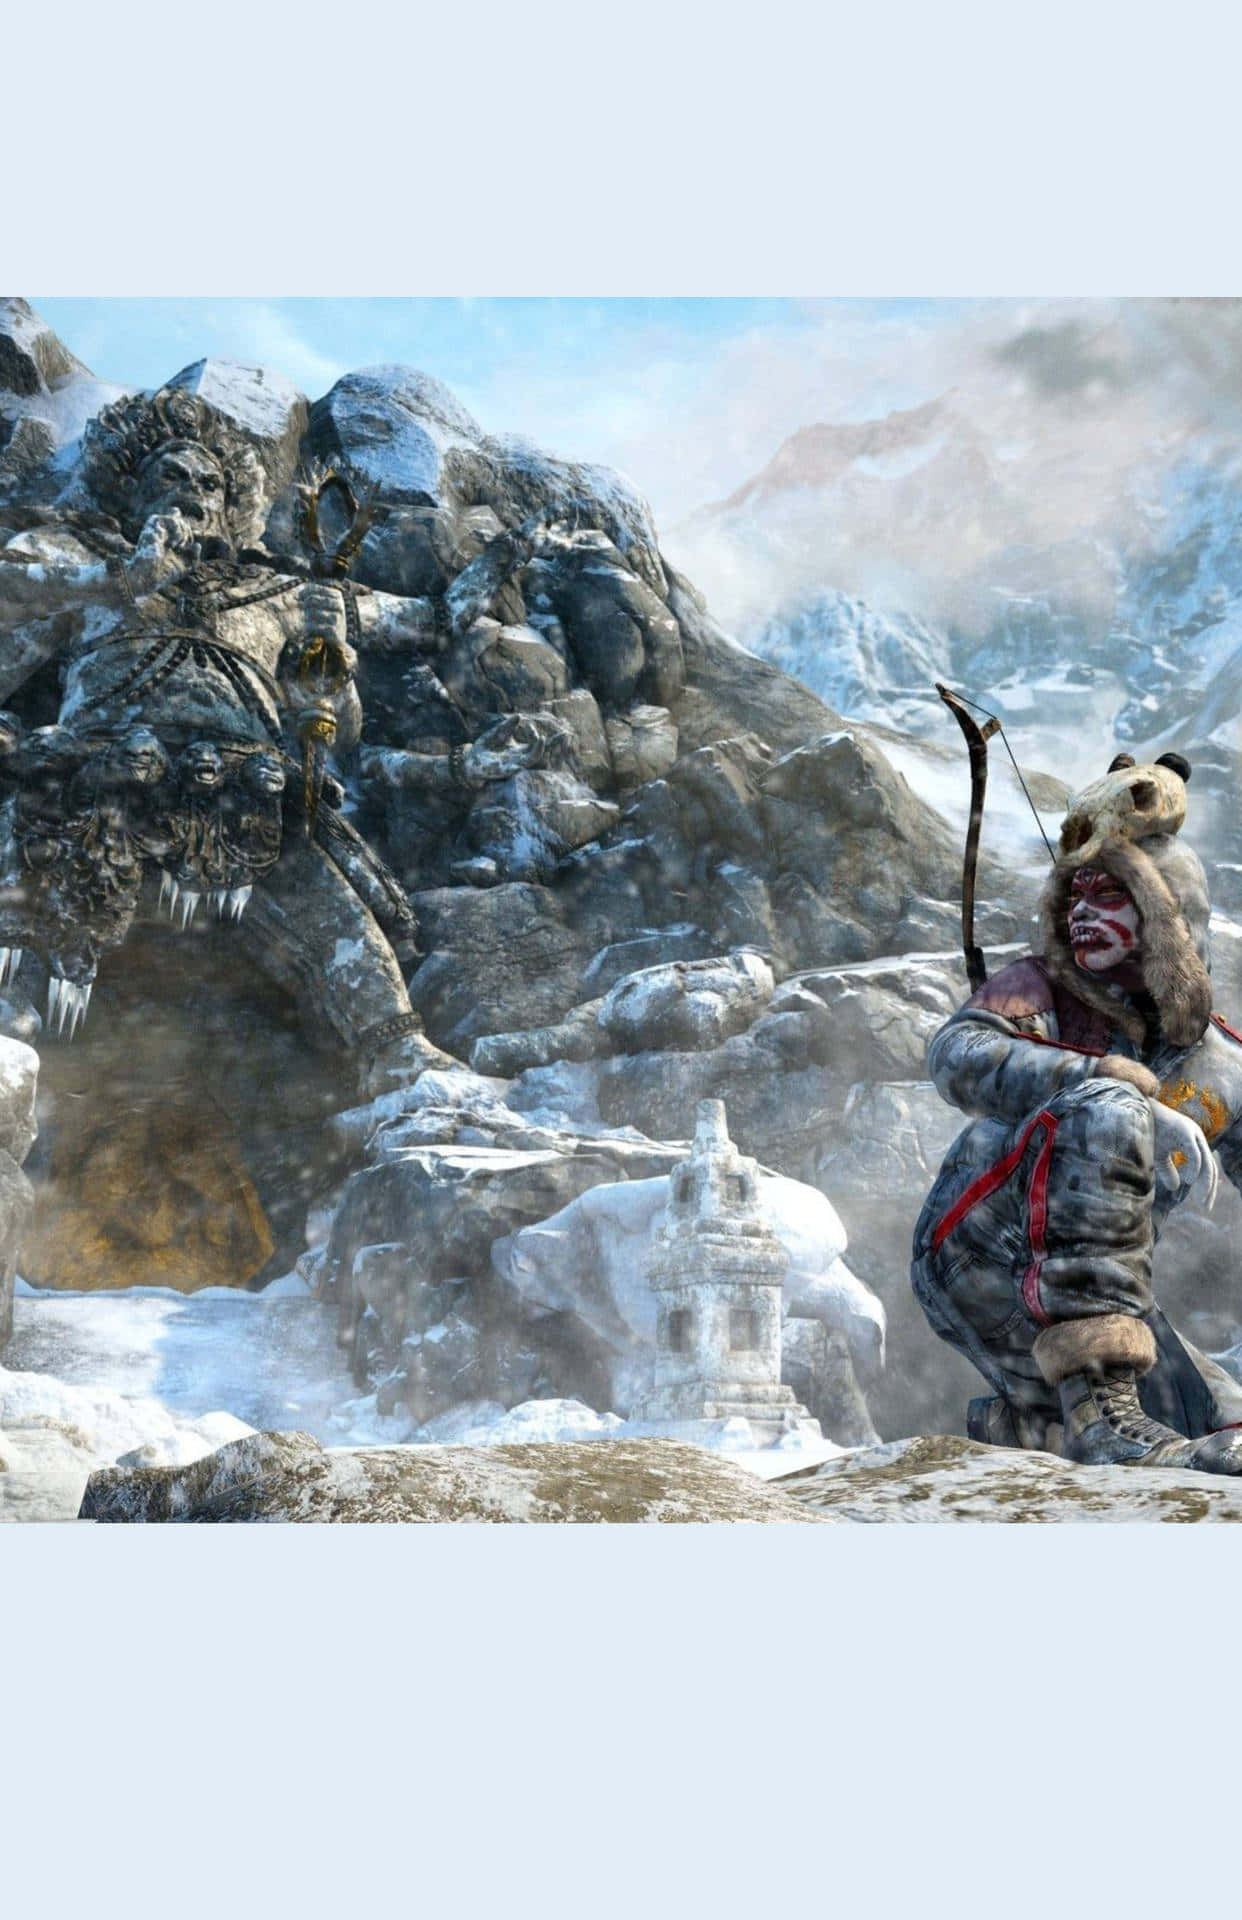 Far Cry 4 Phone captures stunning visuals on its expansive 5.5-inch display Wallpaper